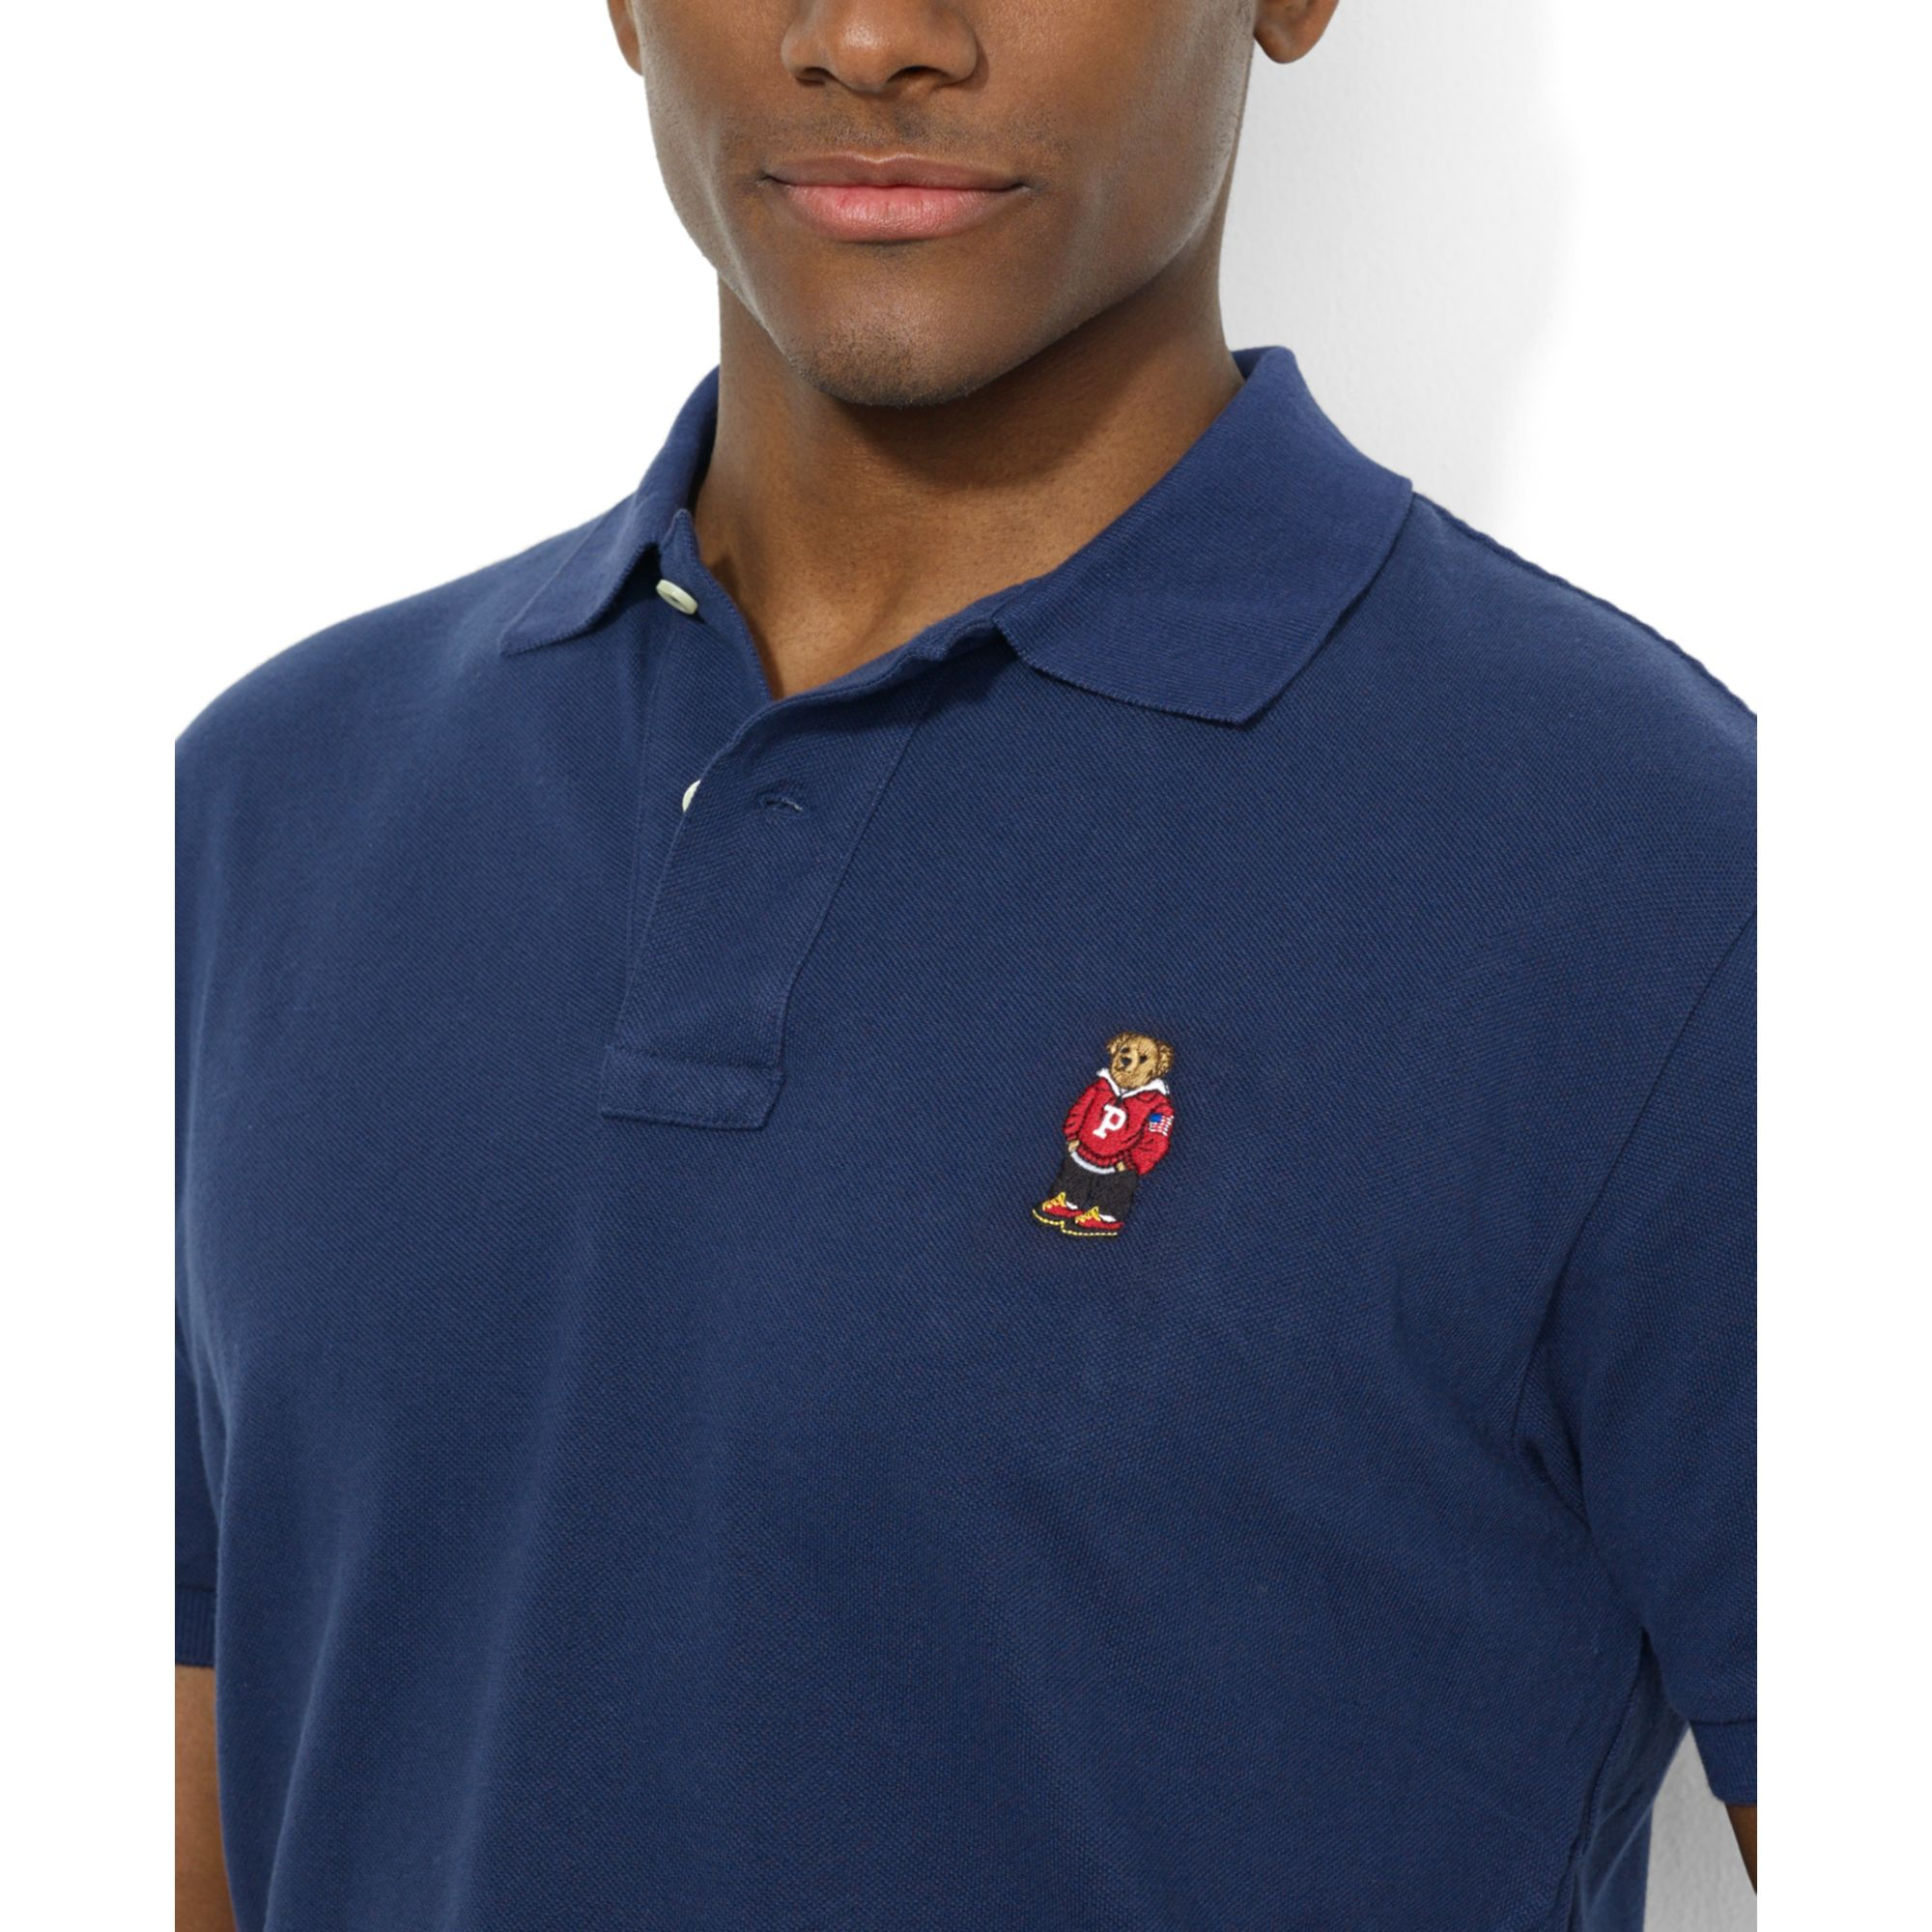  Ralph  Lauren  Classic fit Short sleeve Polo  Bear  Polo  in 